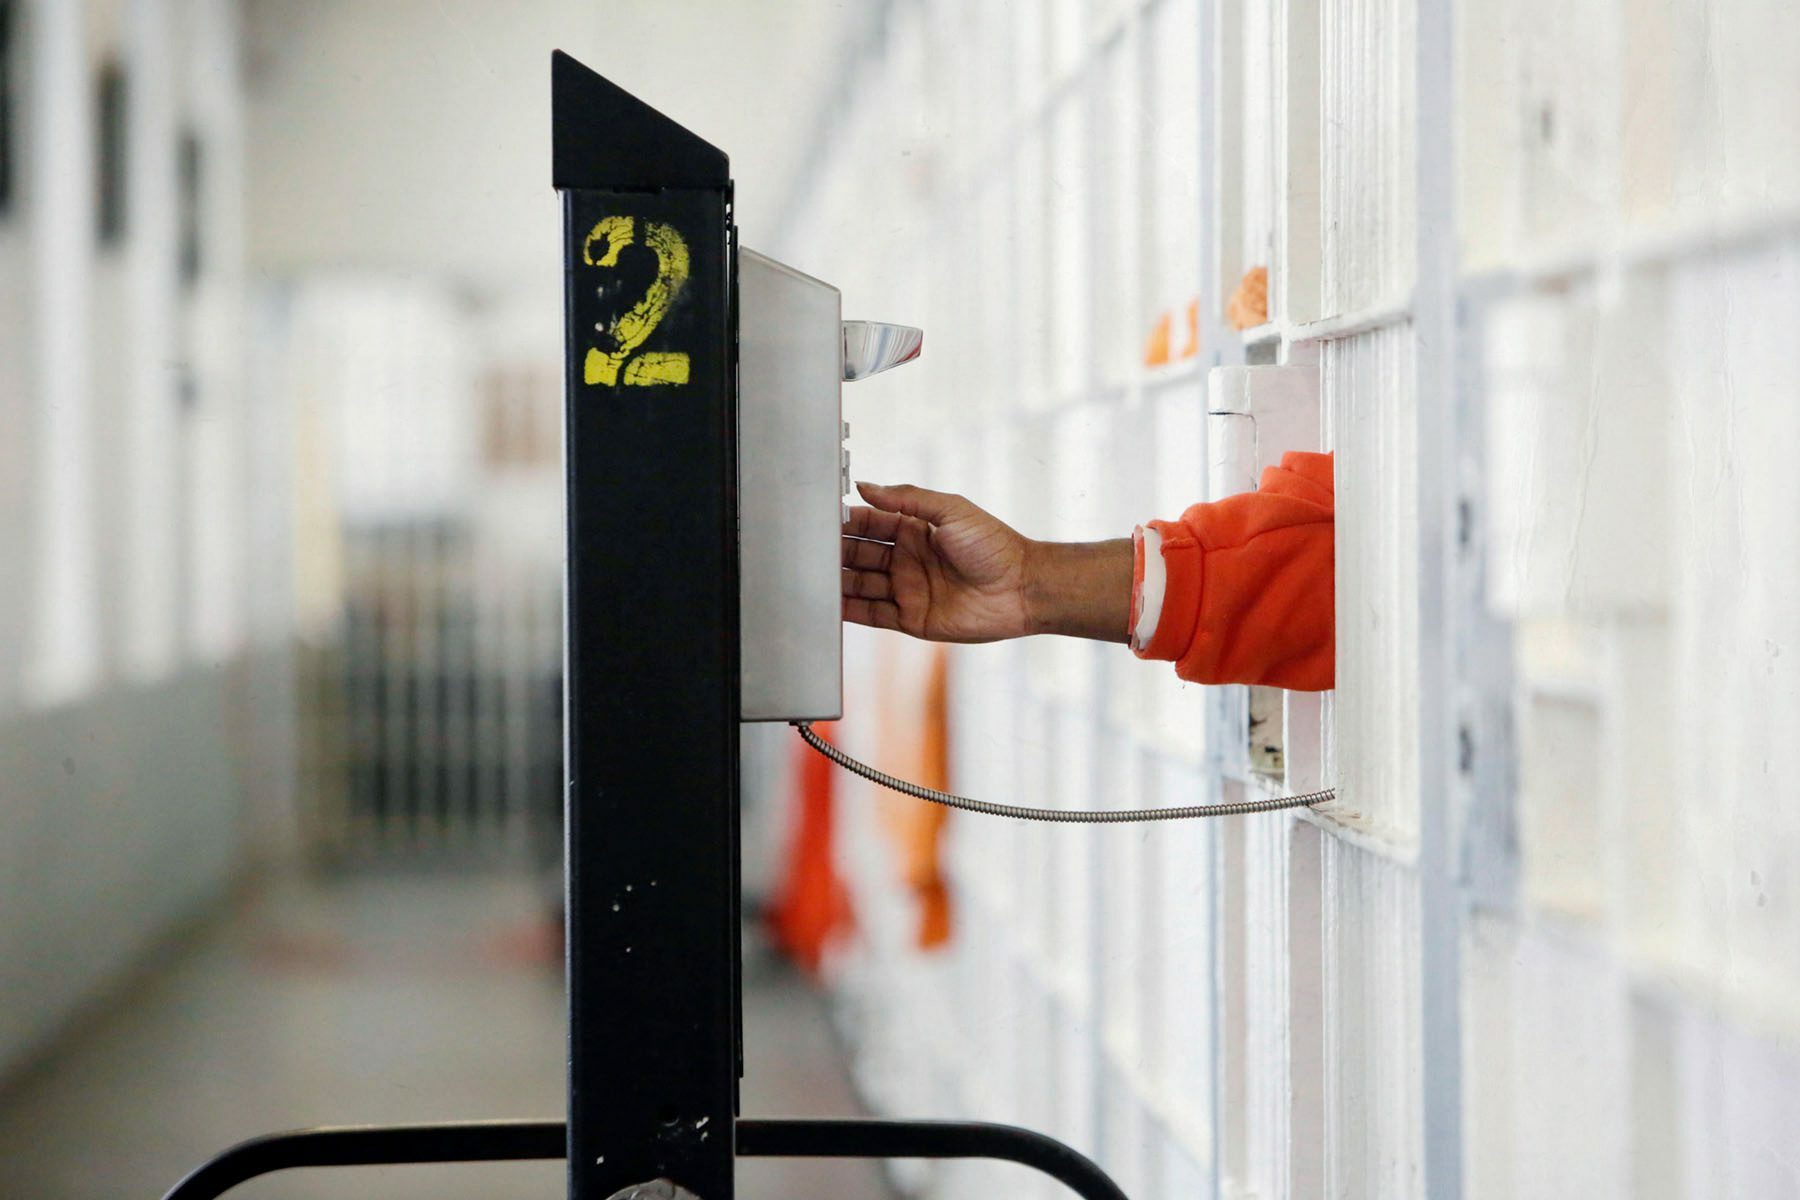 An inmate's hand is seen peeking out their cell as they dial a rollaway phone at a San Francisco jail.